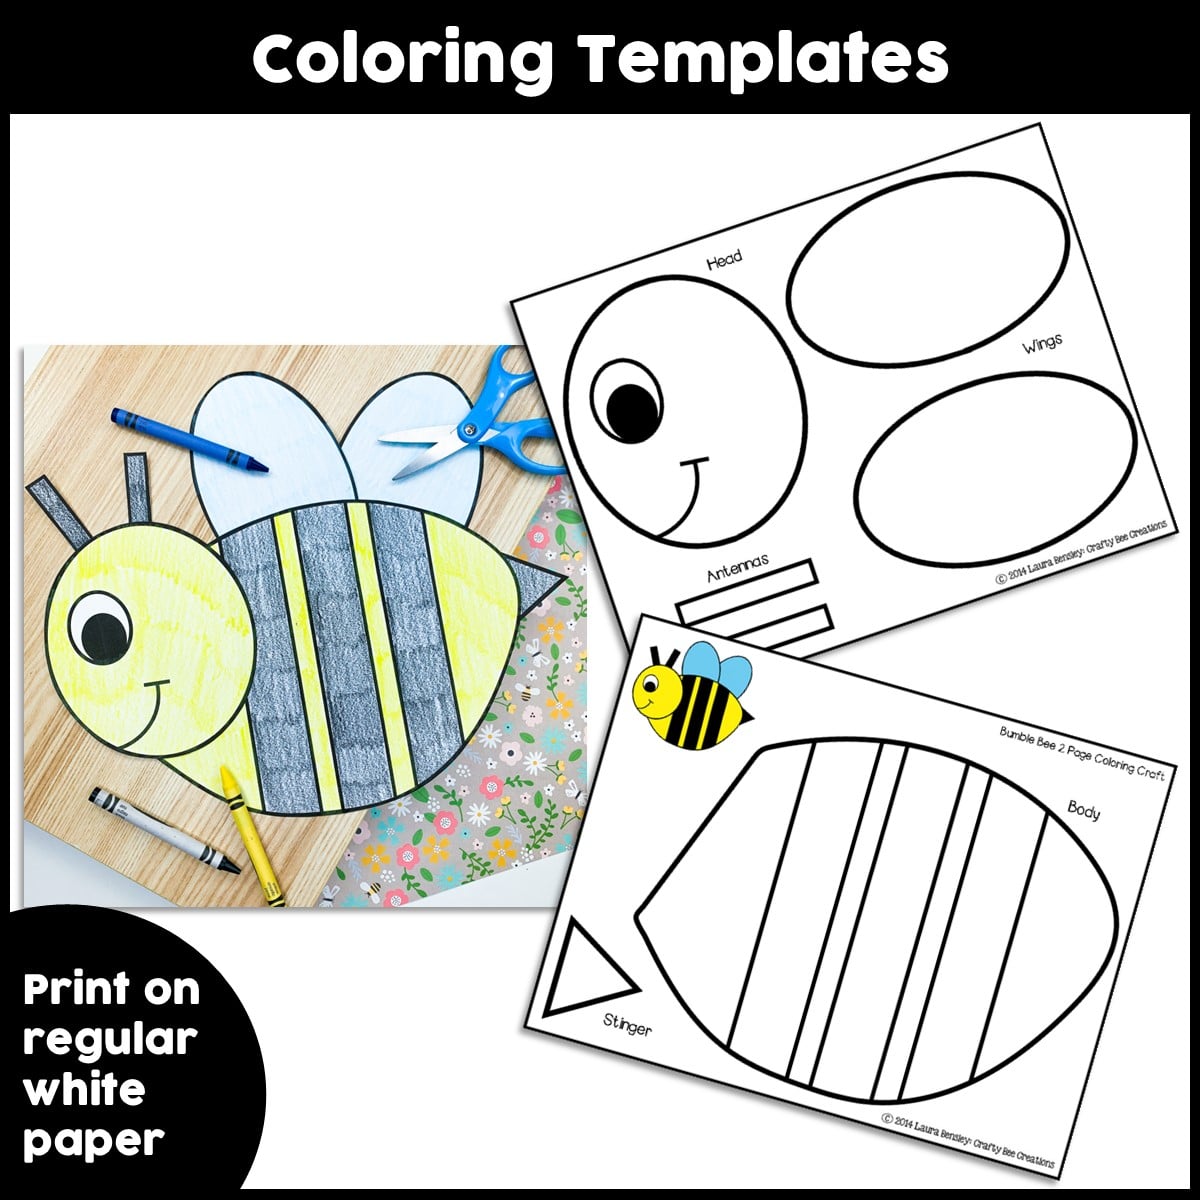 bumble bee craft pattern